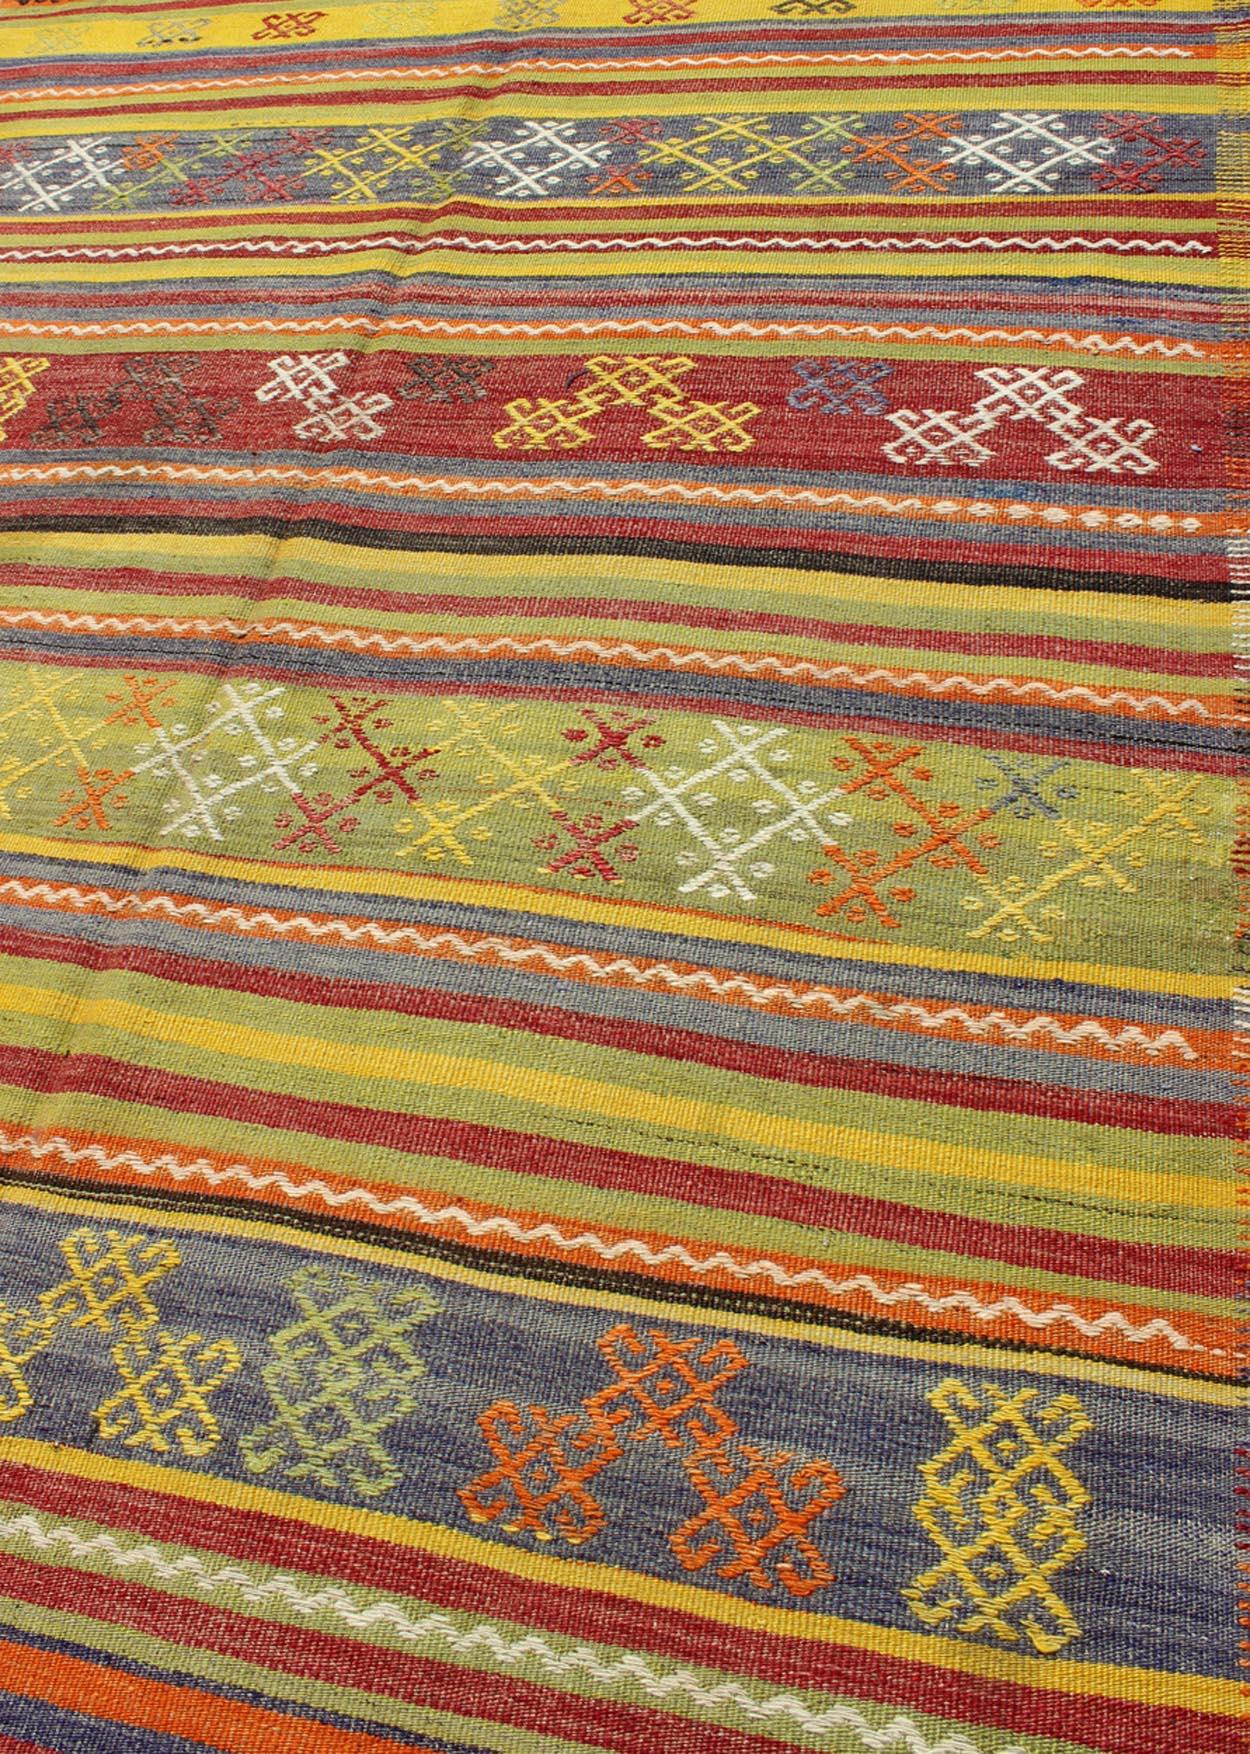 Vintage Turkish Kilim Rug with Geometric Shapes and Colorful Horizontal Stripes For Sale 3